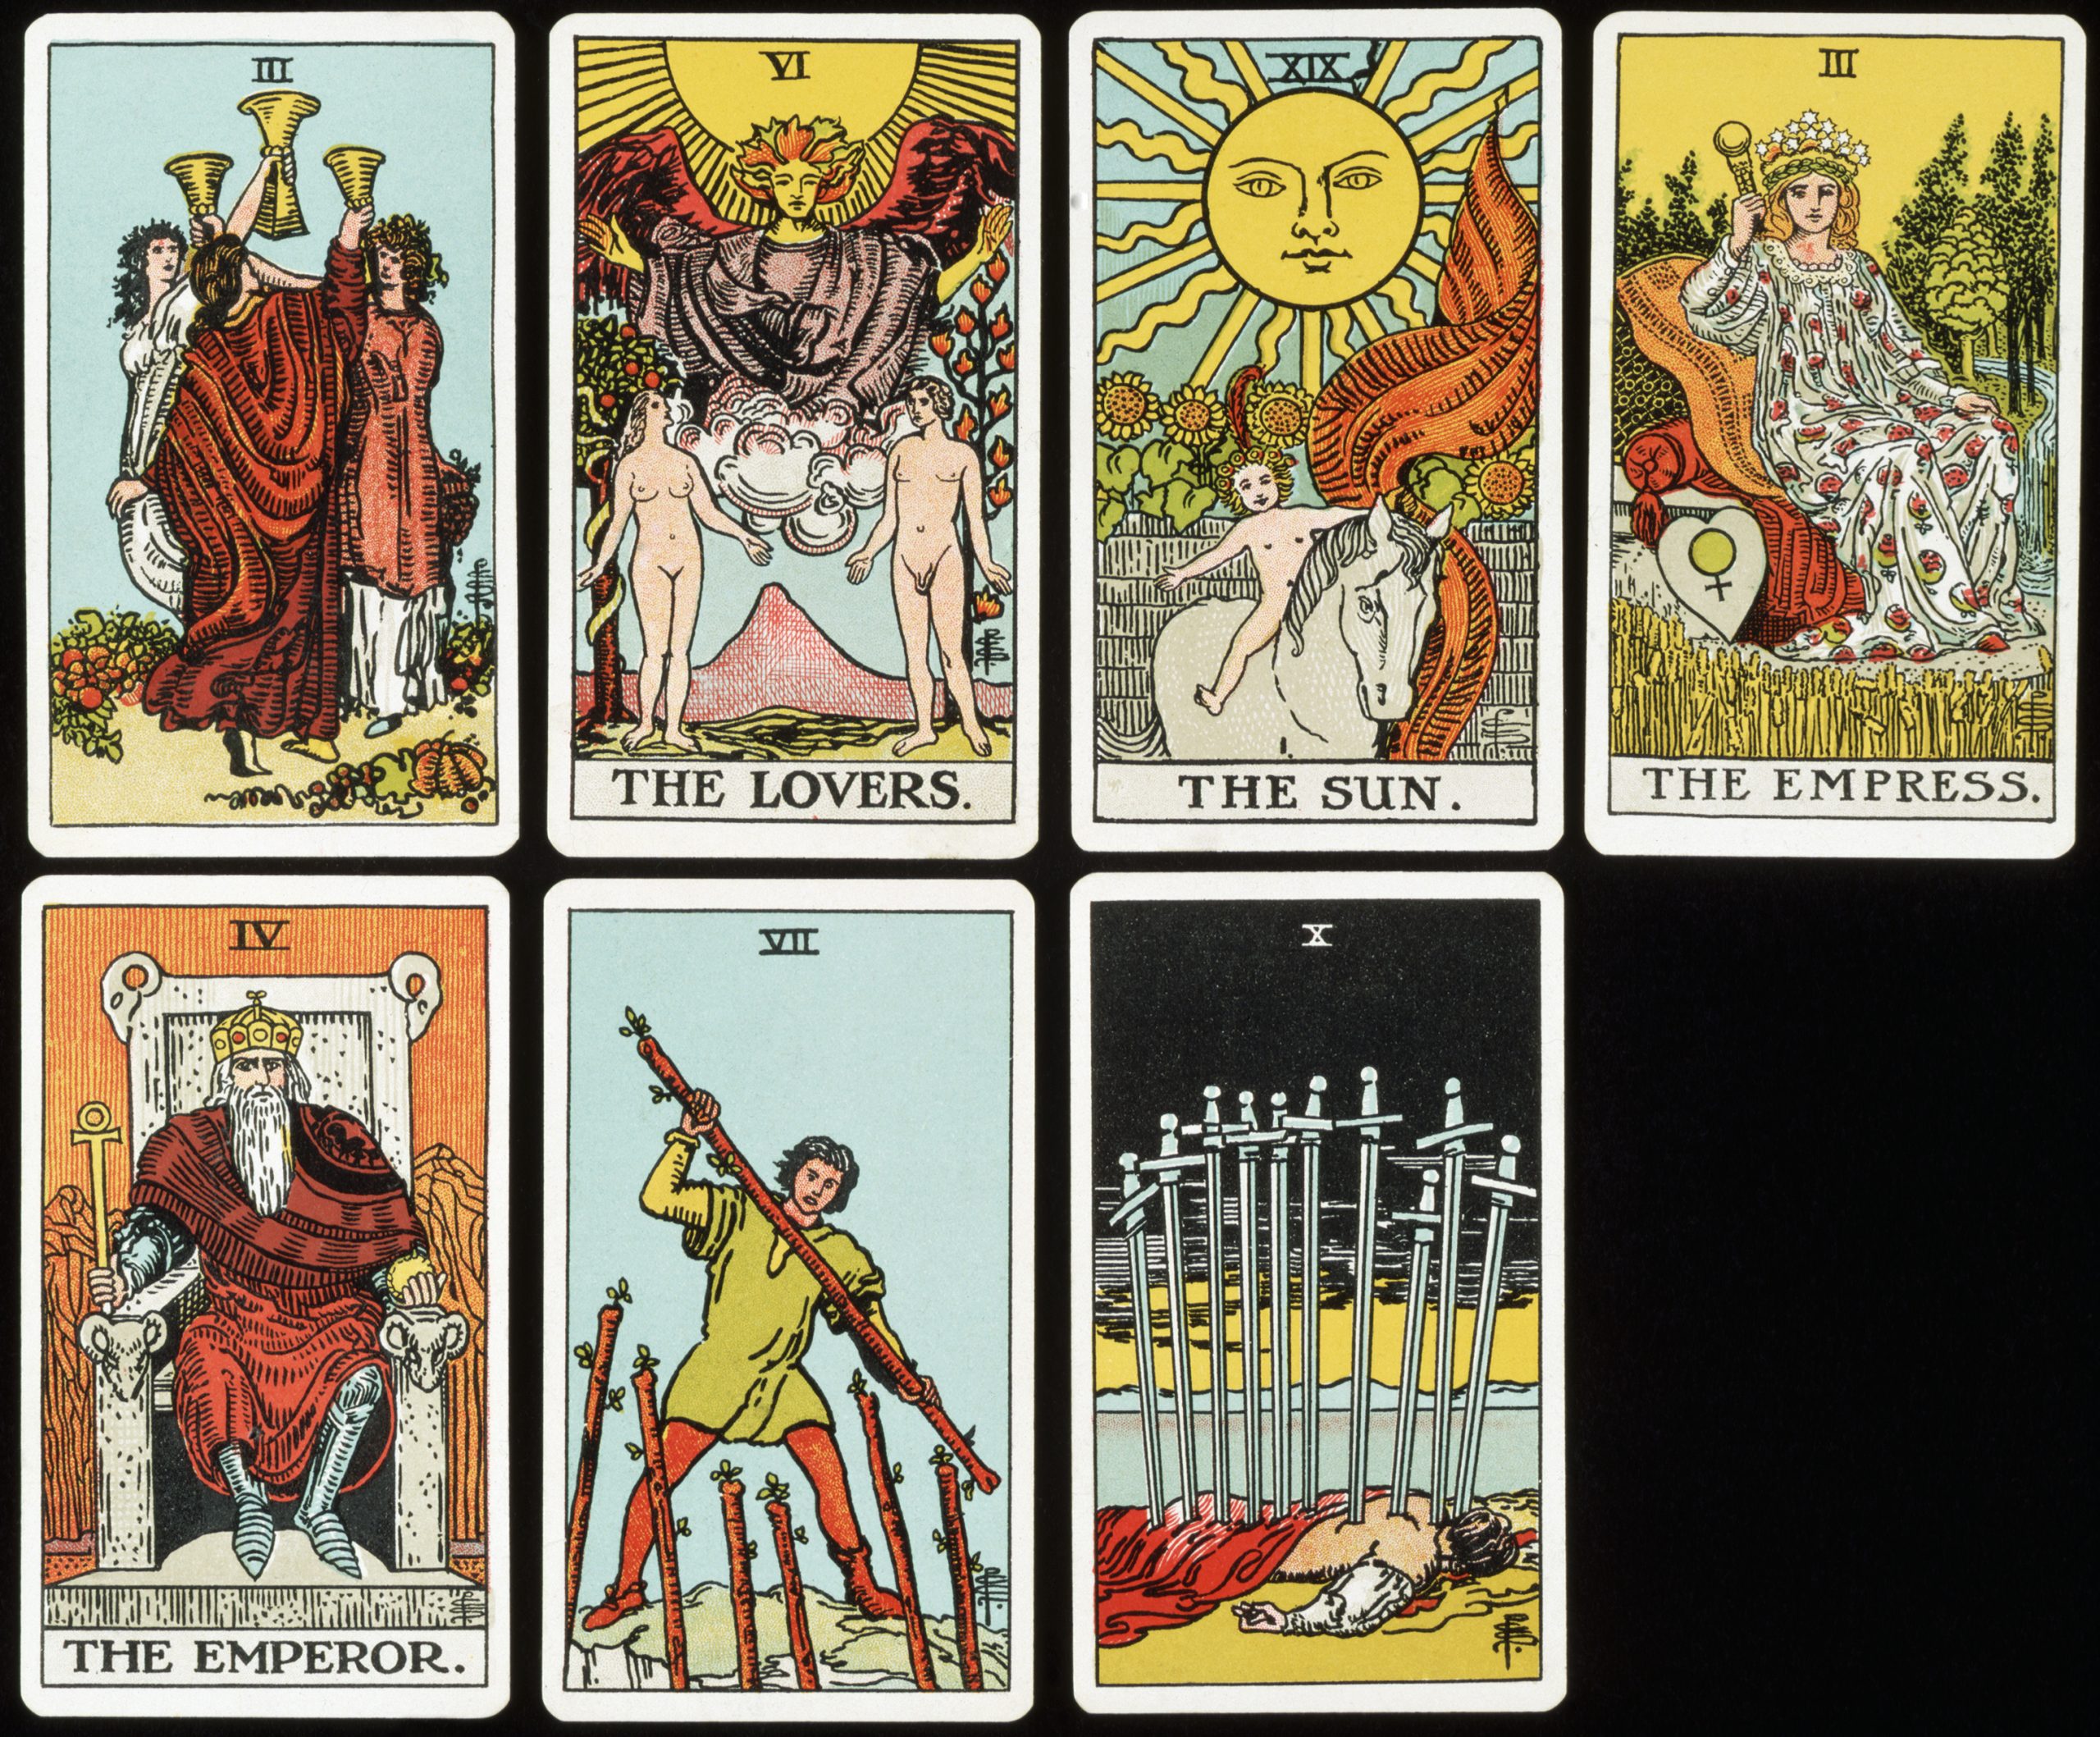 A set of seven Tarot cards rests on a black surface. The cards are illustrated with bright colors and depict mythical scenes. Some cards have text such as “The Sun” or “The Empress” in big bold letters written underneath the illustrations.